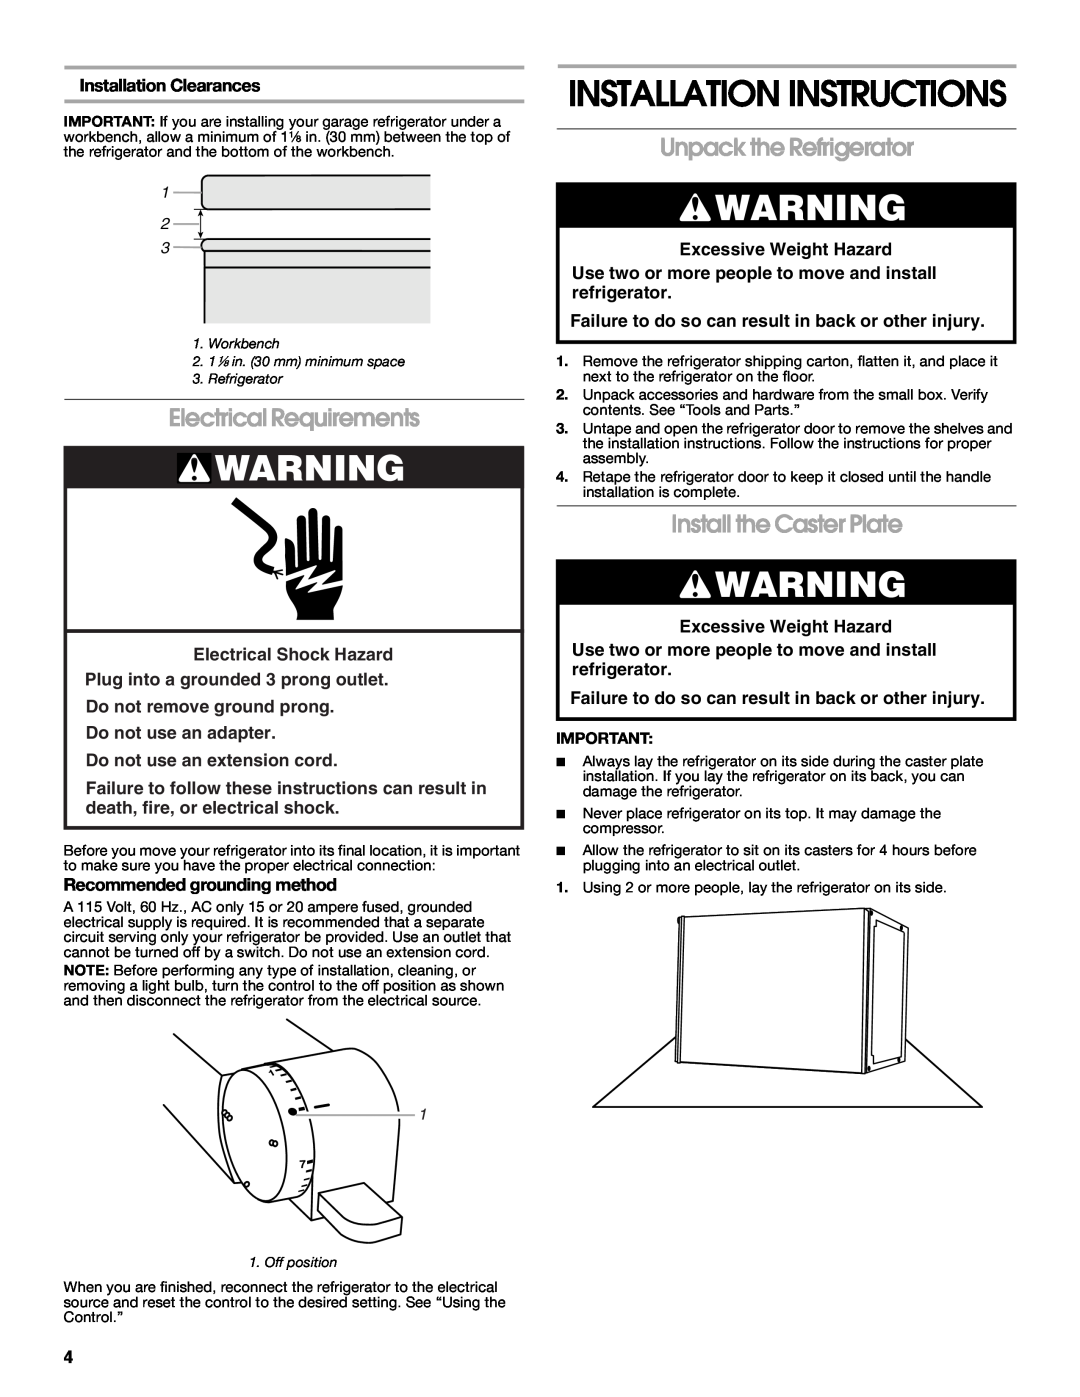 Whirlpool GARF06XXMG00 manual Installation Instructions, Electrical Requirements, Unpack the Refrigerator 